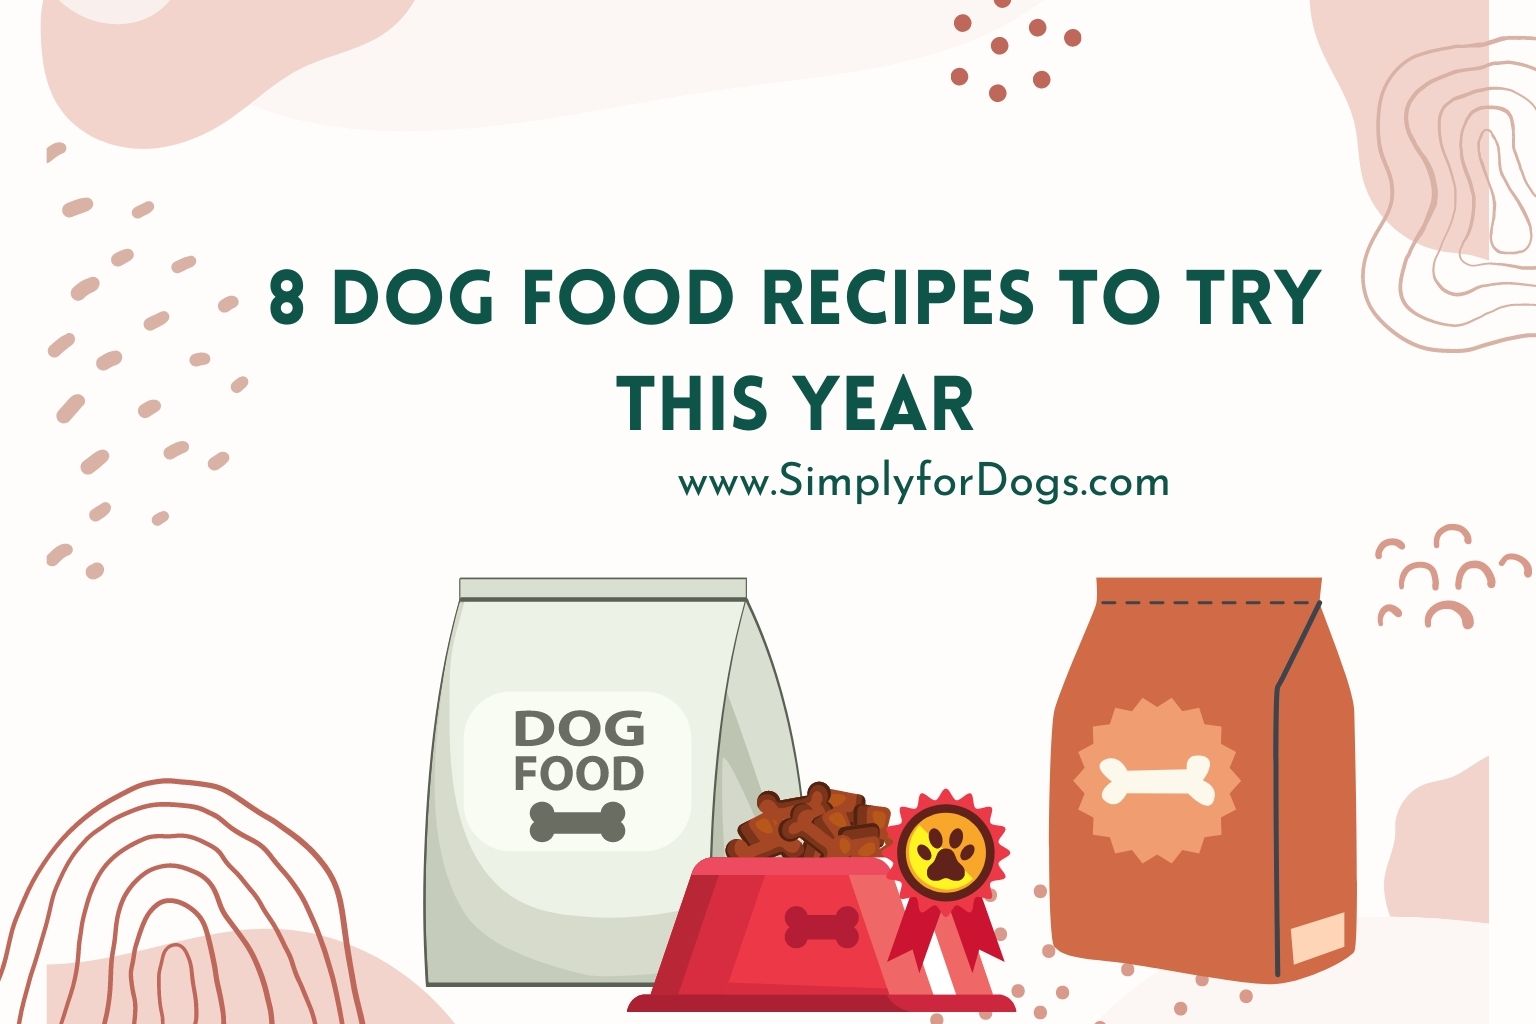 8 Dog Food Recipes to Try This Year